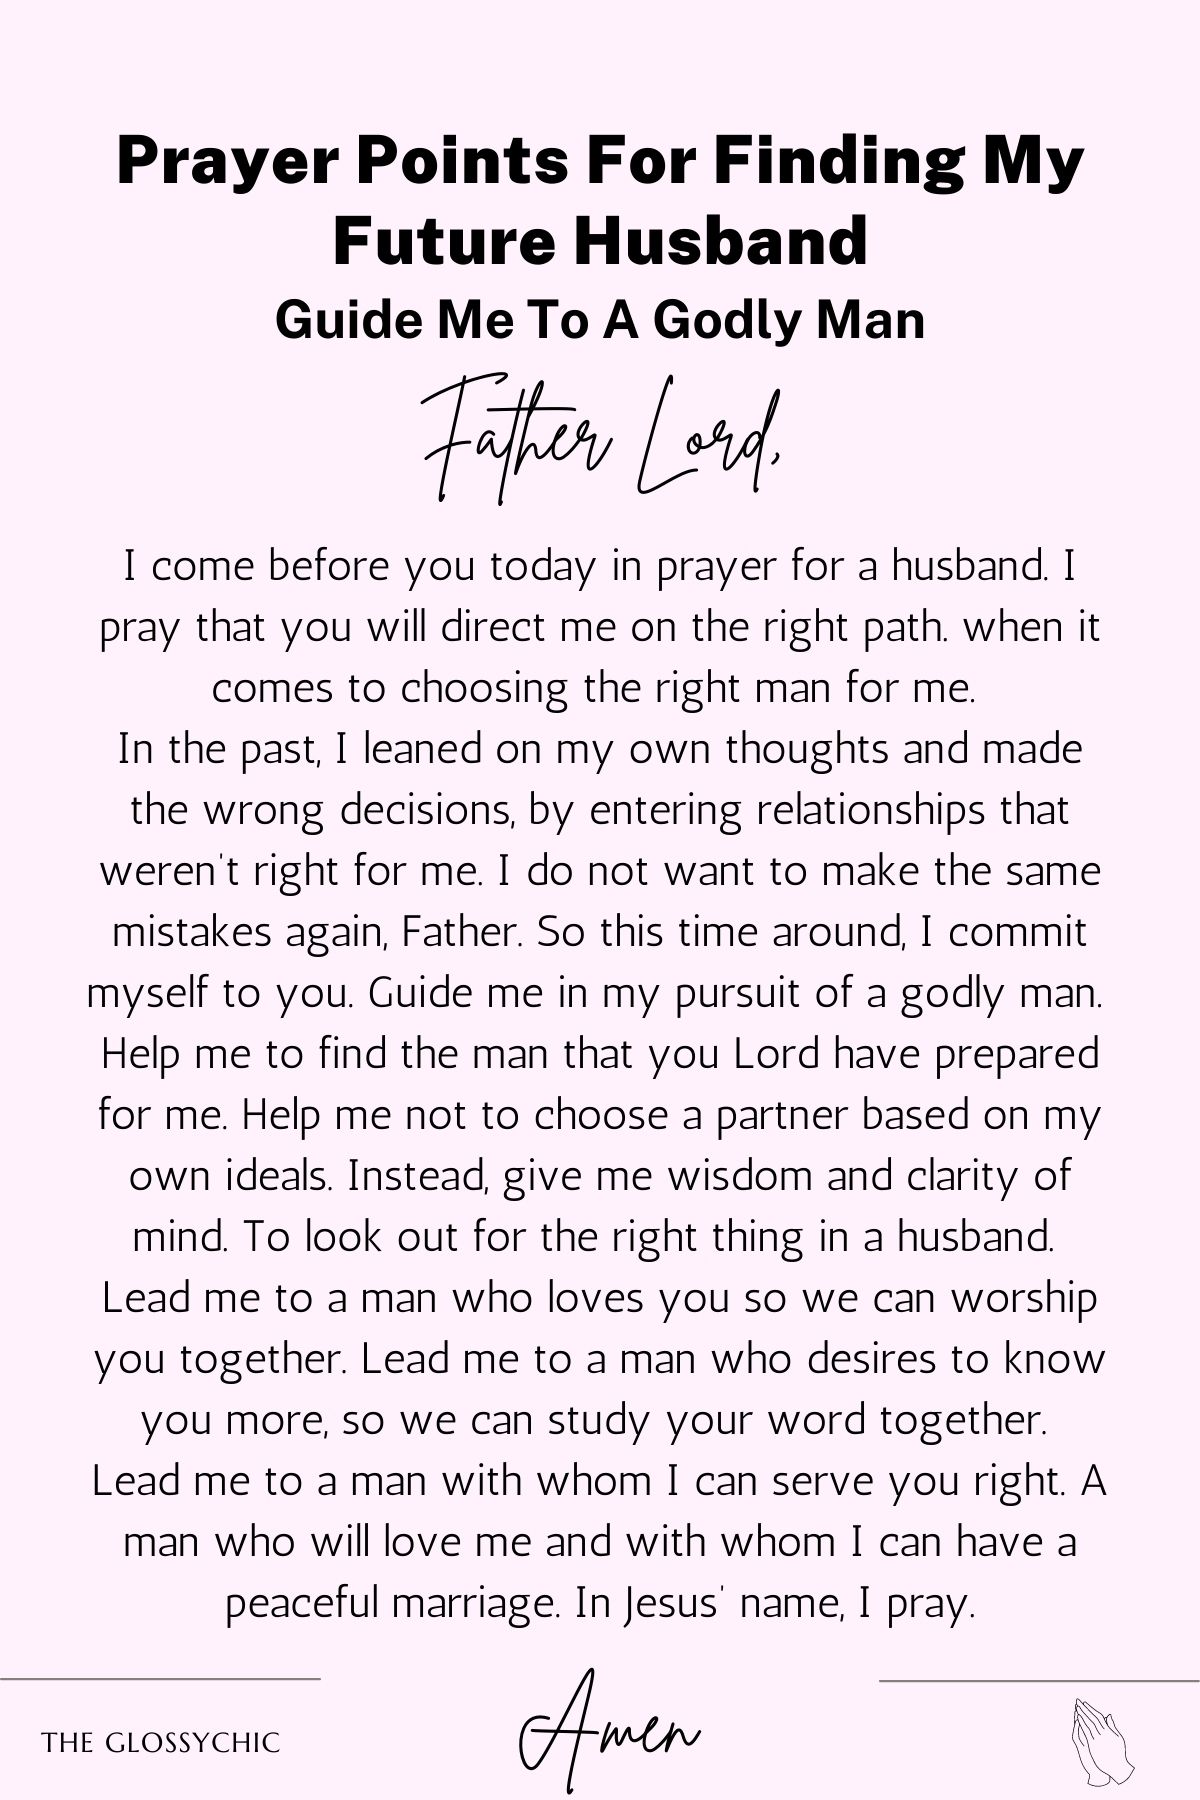 Guide Me To A Godly Man